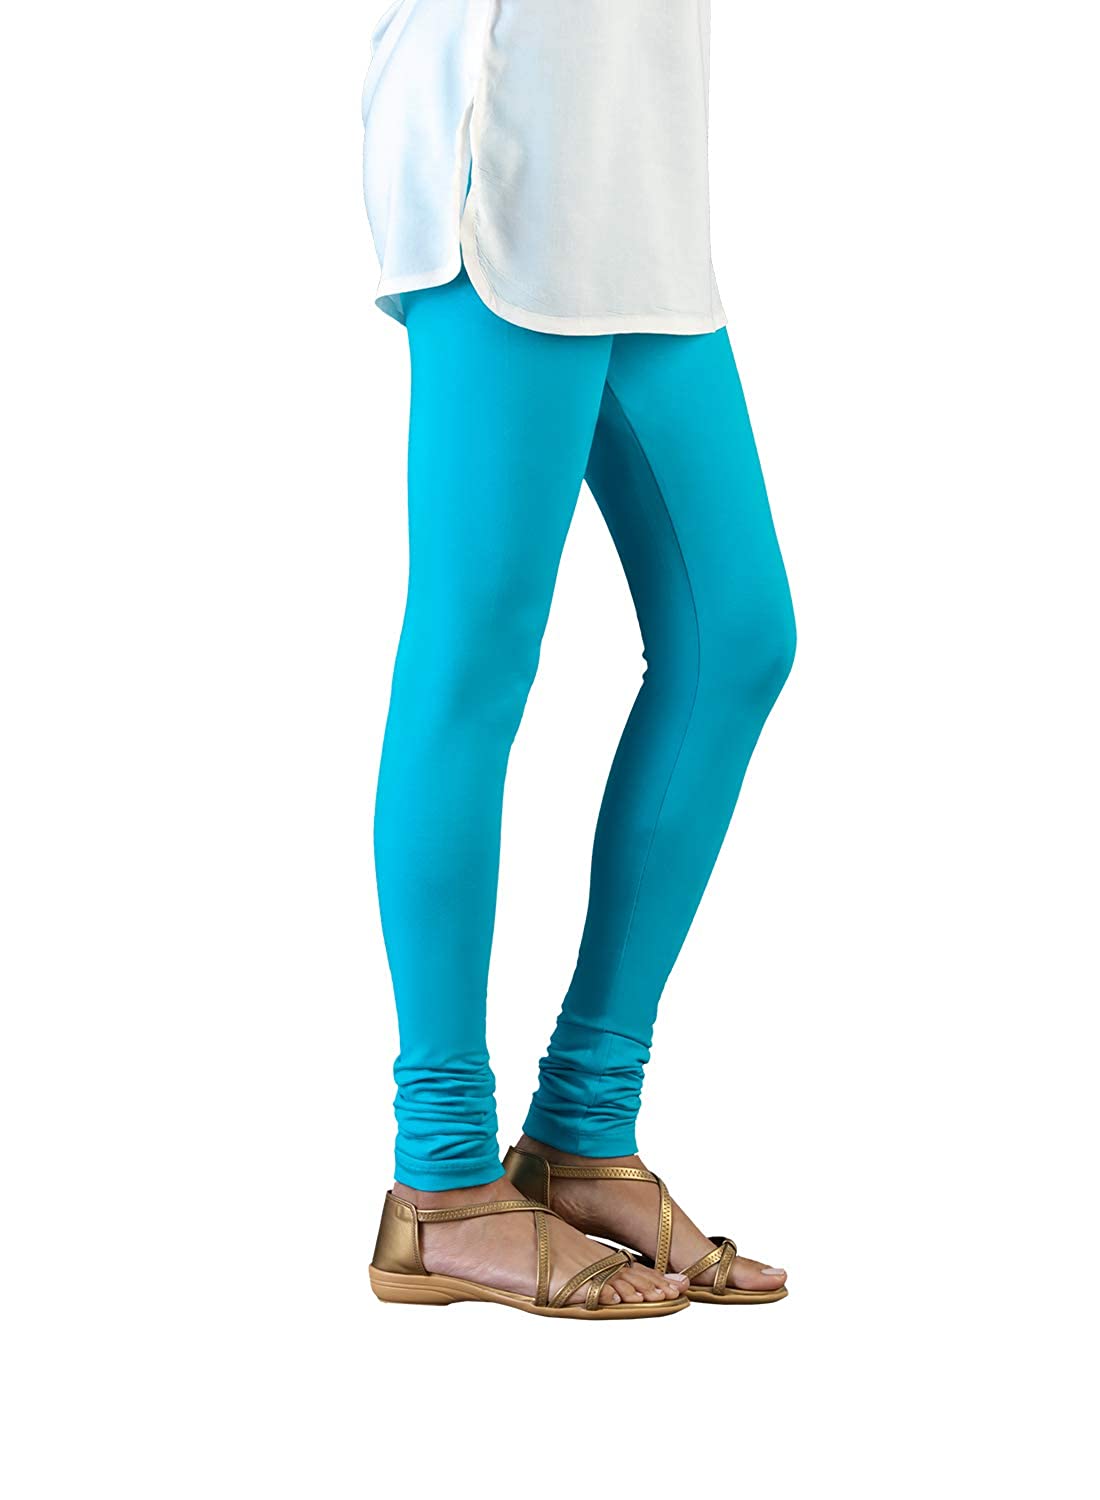 Go Colors Women Solid Peacock Blue Slim Fit Ankle Length Leggings - Tall:  Buy Go Colors Women Solid Peacock Blue Slim Fit Ankle Length Leggings -  Tall Online at Best Price in